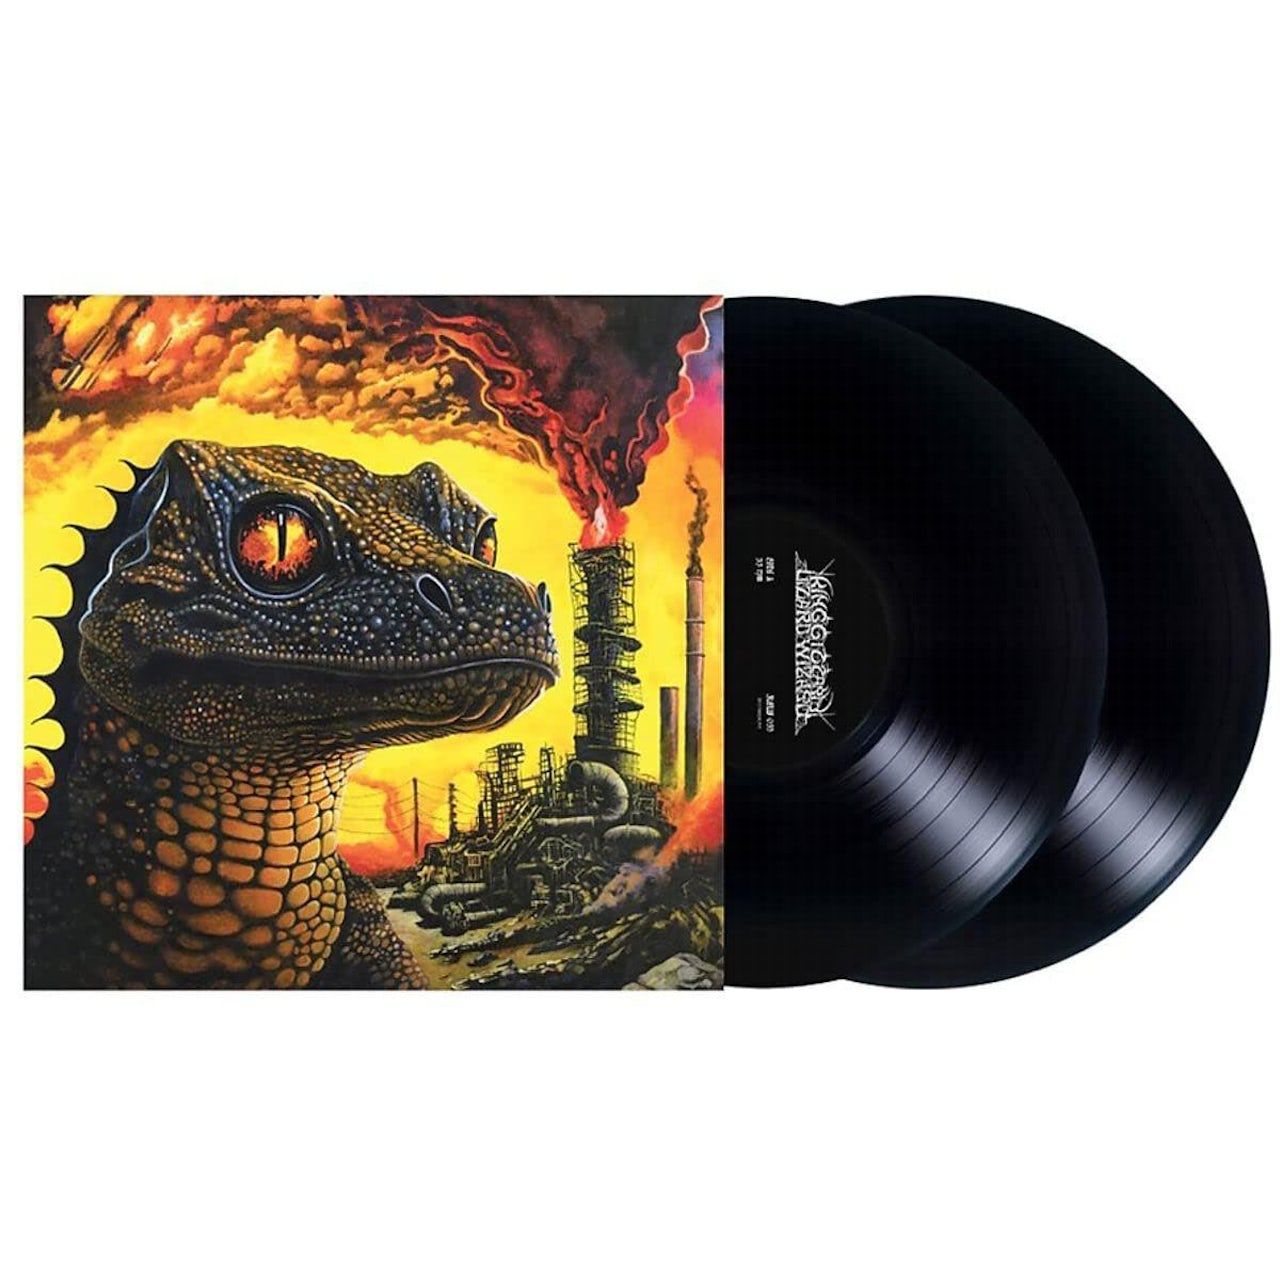 0842812189524, Виниловая пластинка King Gizzard & The Lizard Wizard, Petrodragonic Apocalypse; Or, Dawn Of Eternal Night: An Annihilation Of Planet Earth And The Beginning Of Merciless Damnation (coloured) king gizzard and the lizard wizard murder of the universe